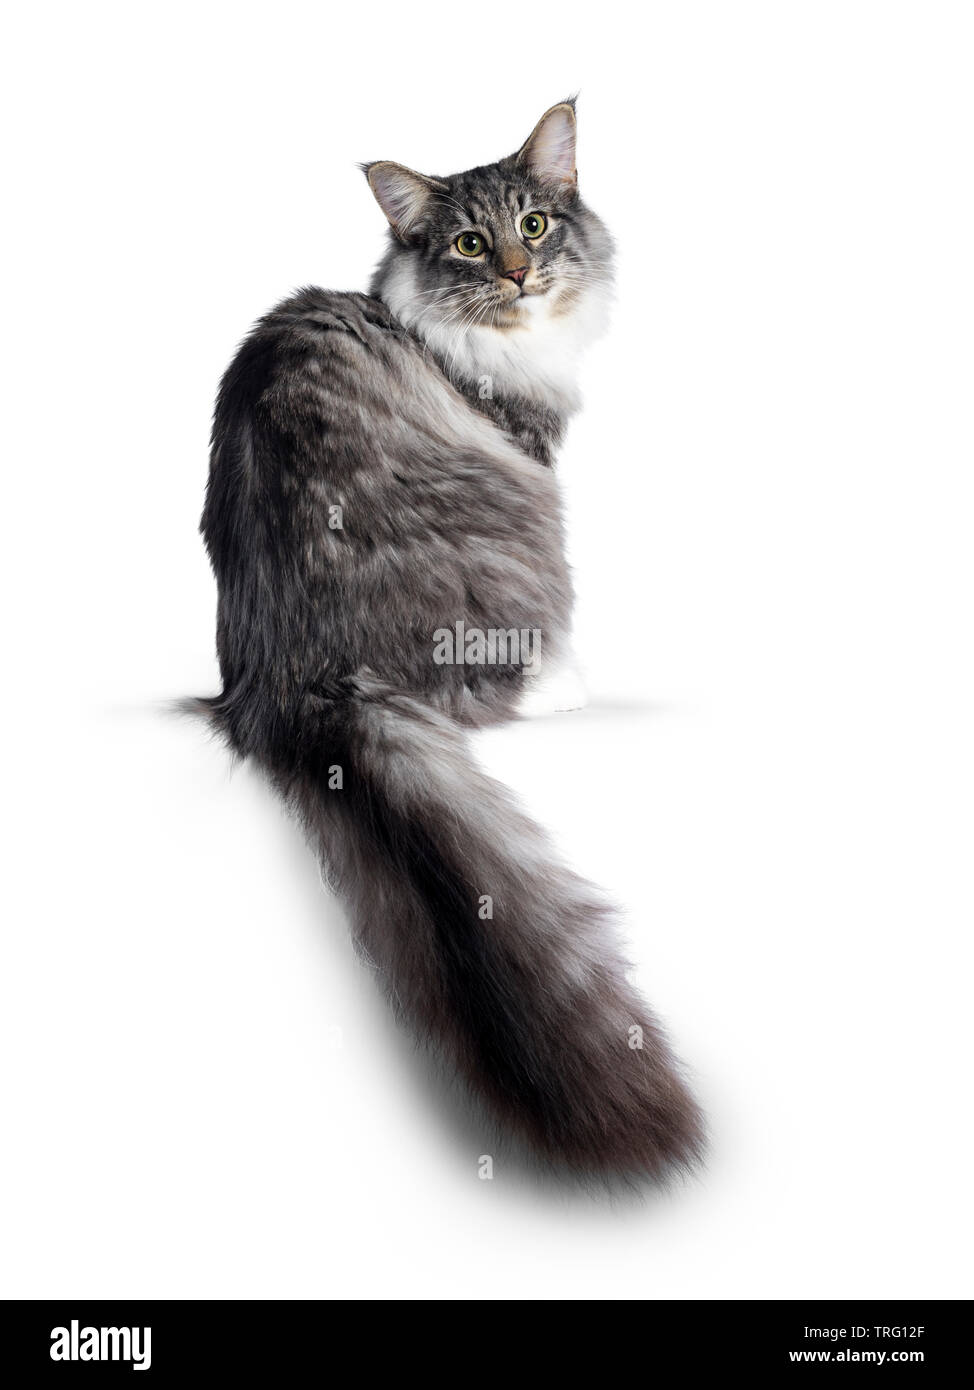 Cute Norwegian Forestcat youngster, sitting side ways / backwards. Looking over shoulder at lens with green / yellow eyes. Isolated on white backgroun Stock Photo